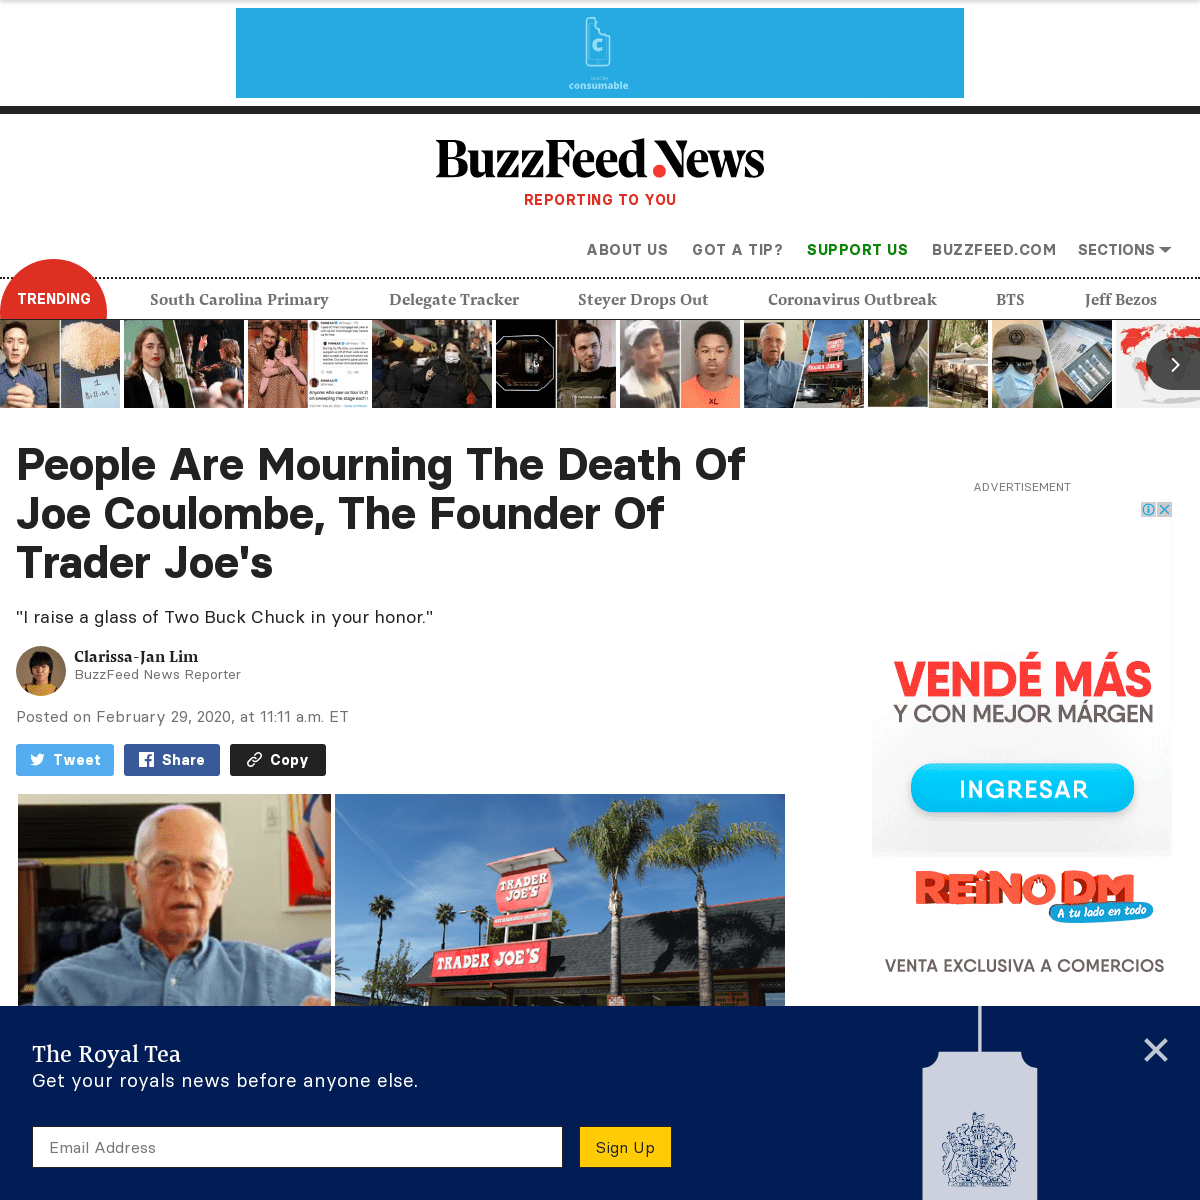 A complete backup of www.buzzfeednews.com/article/clarissajanlim/joe-coulombe-trader-joes-founder-dies-obituary